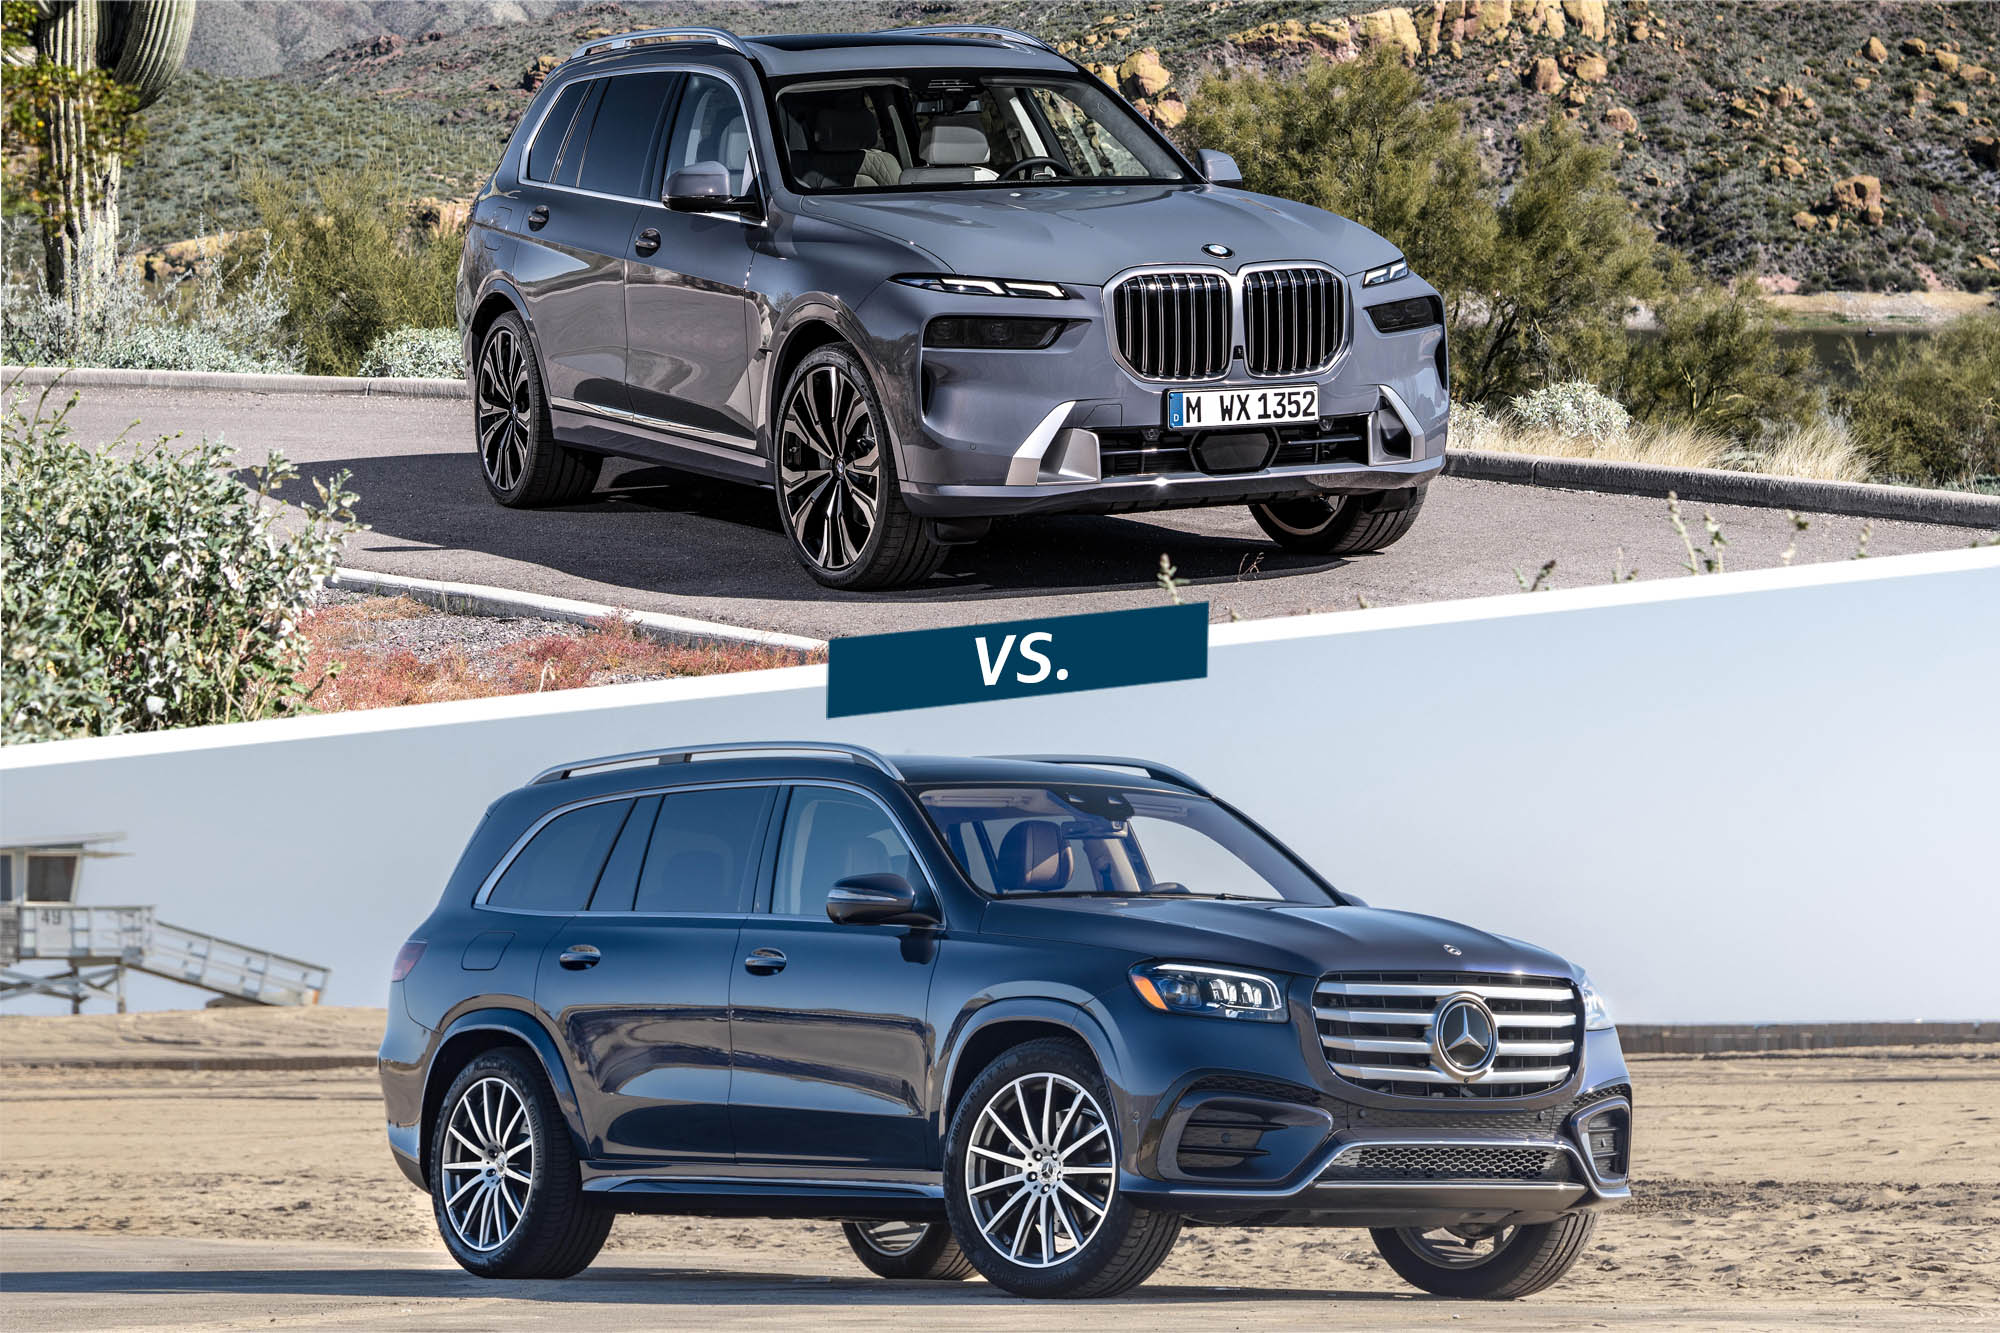 Split-screen image of a 2023 BMW X7 xDrive40i in gray atop a blue 2023 Mercedes-Benz GLS 450 4Matic